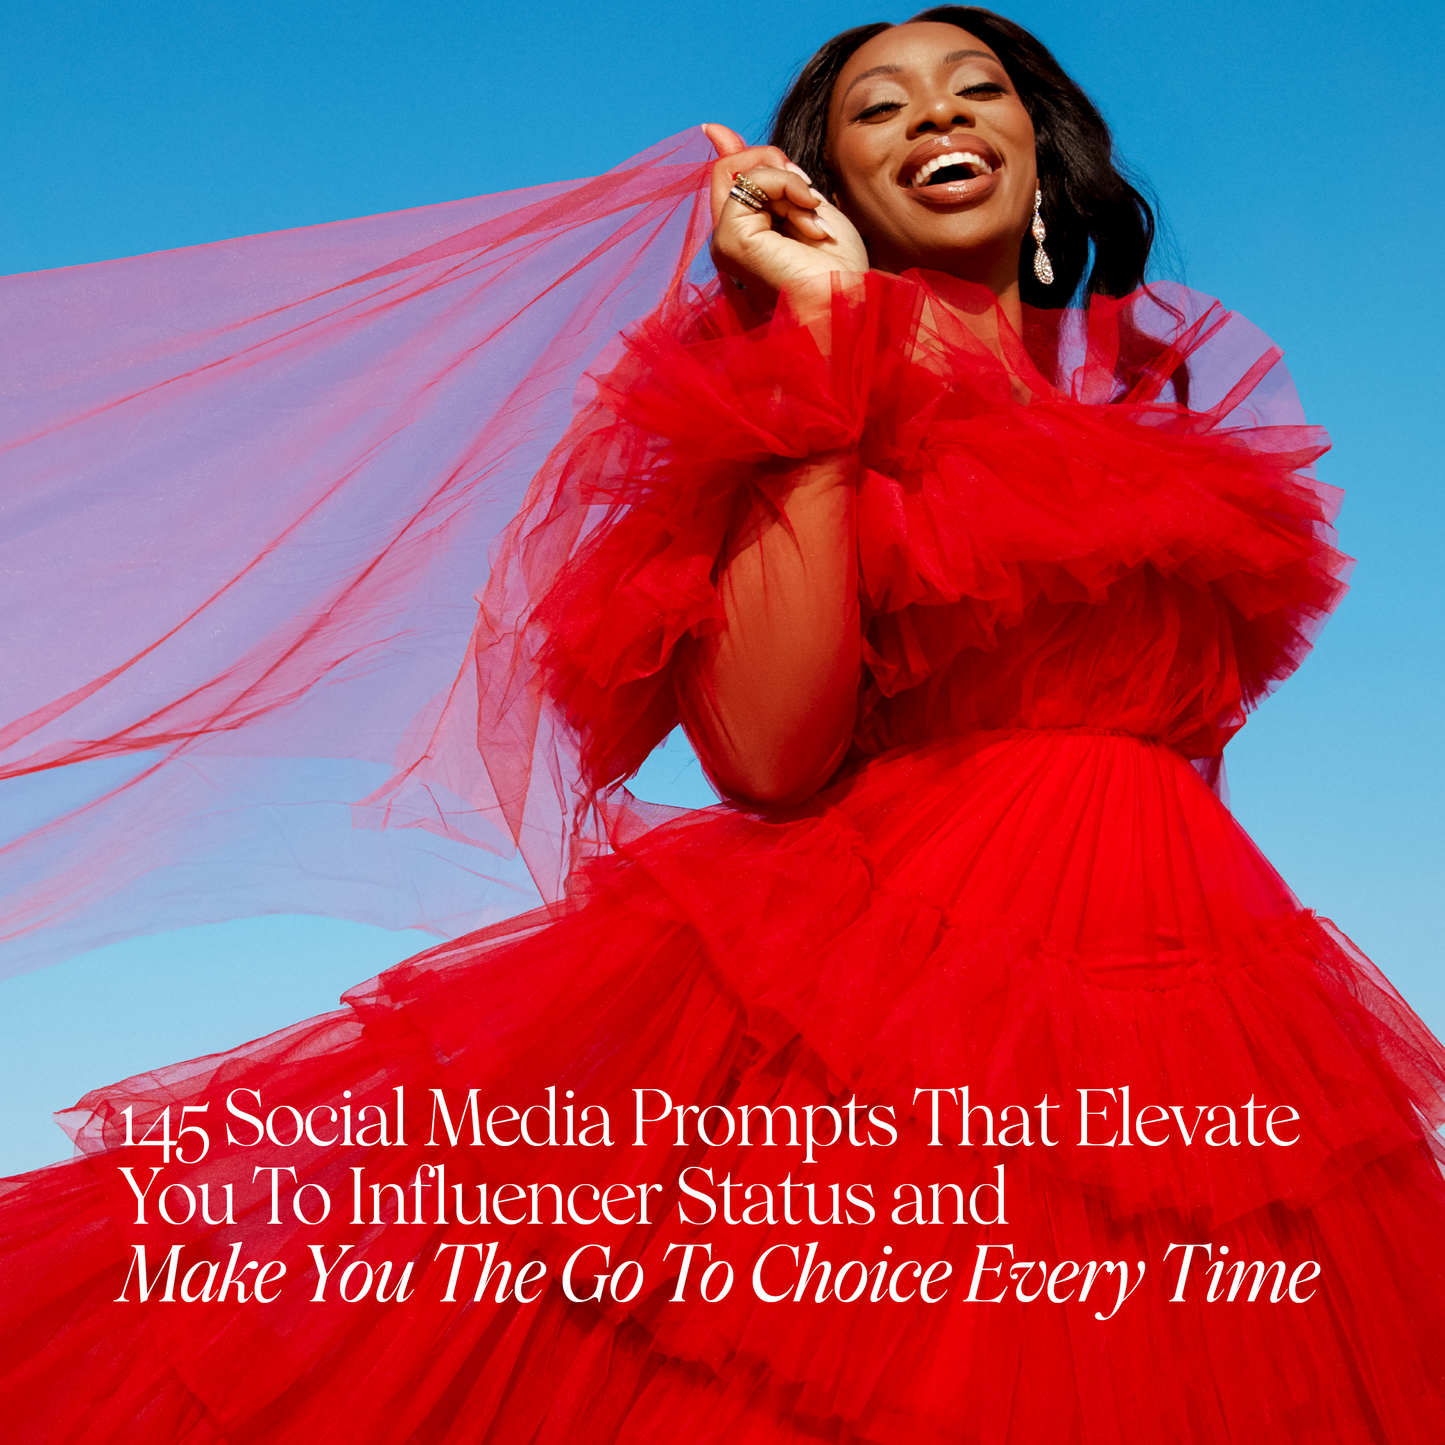 145 Social Media Prompts That Elevate You To Influencer Status & Make You The Go To Choice Every Time